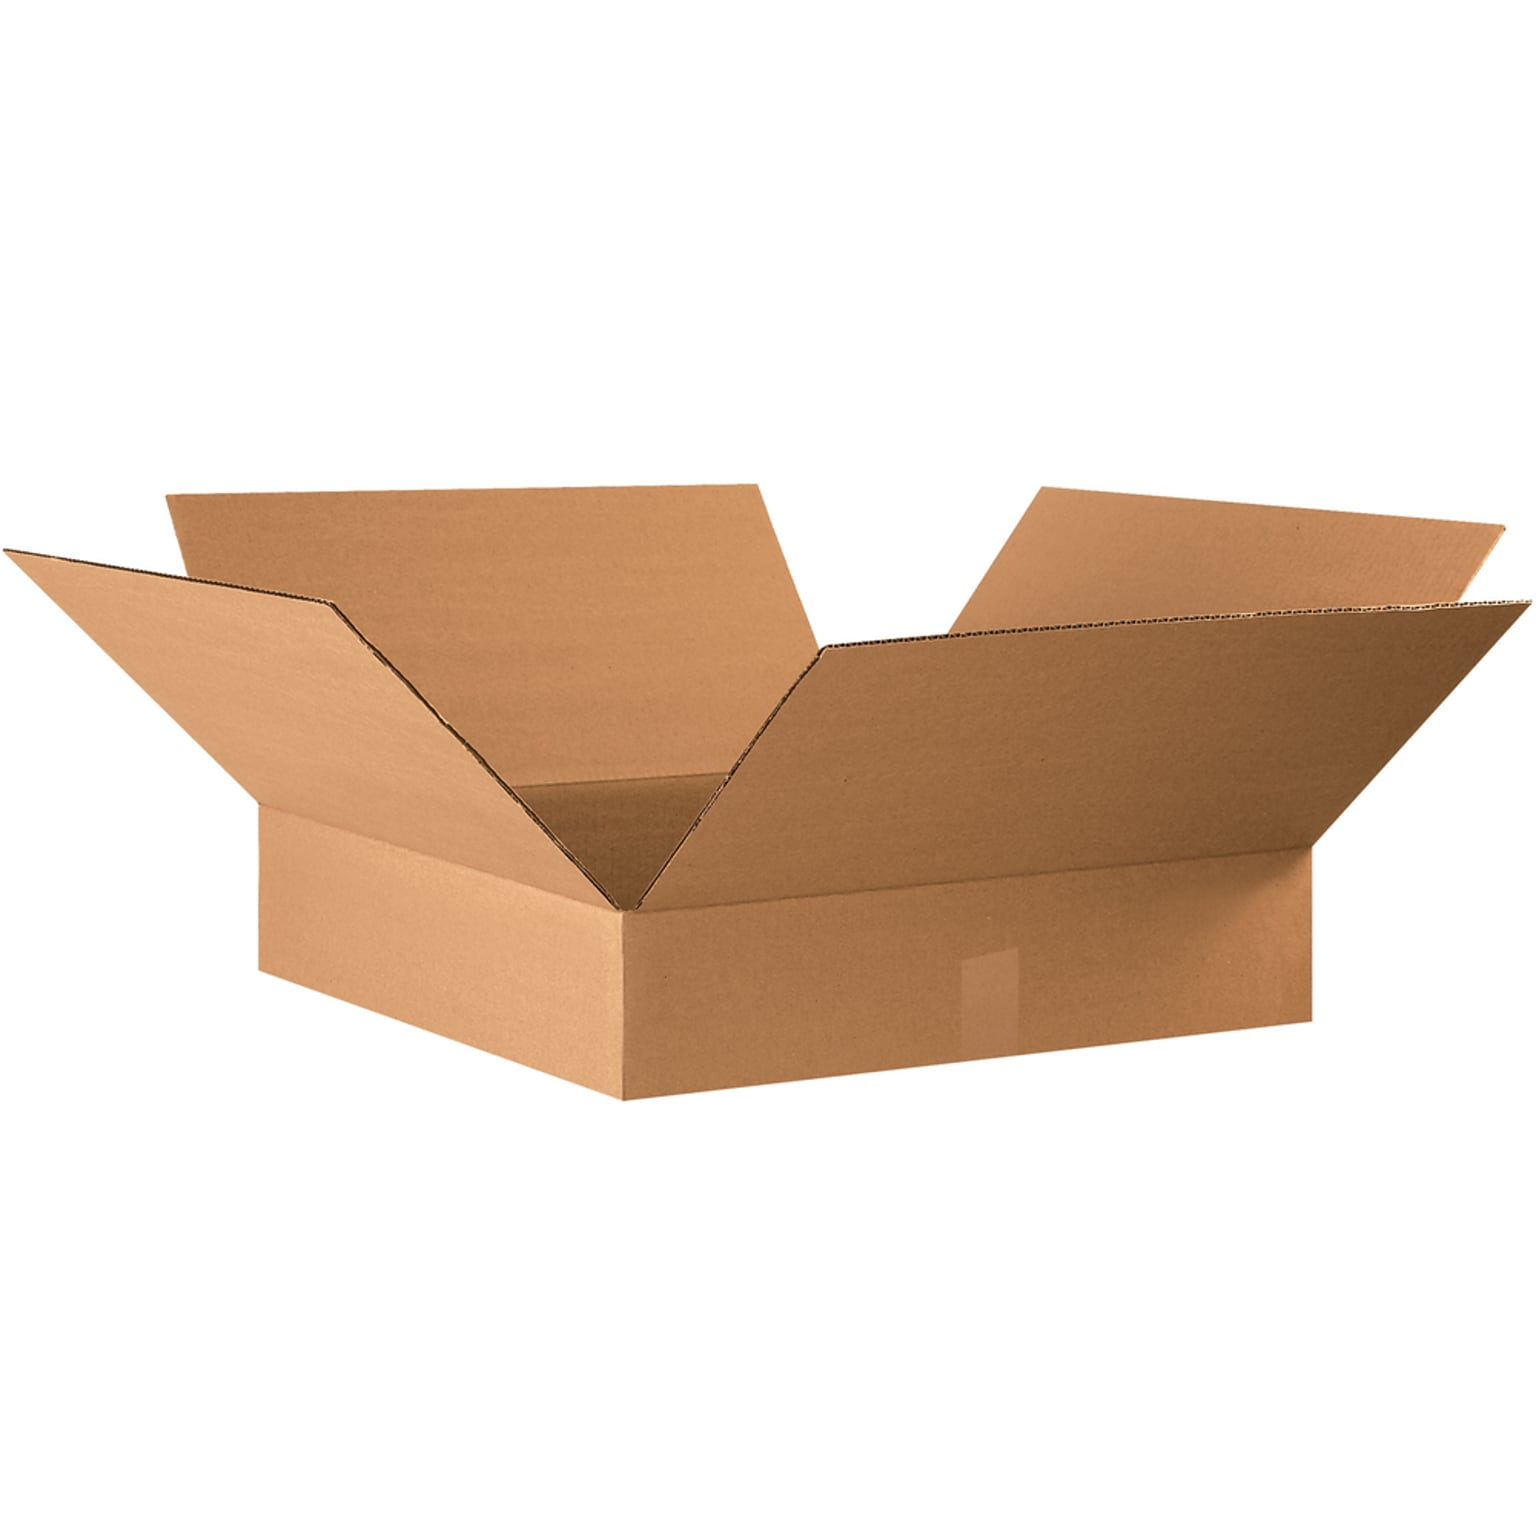 SI Products 22 x 22 x 4 Corrugated Shipping Boxes, 200#/ECT-32 Mullen Rated Corrugated, Pack of 10, (22224)